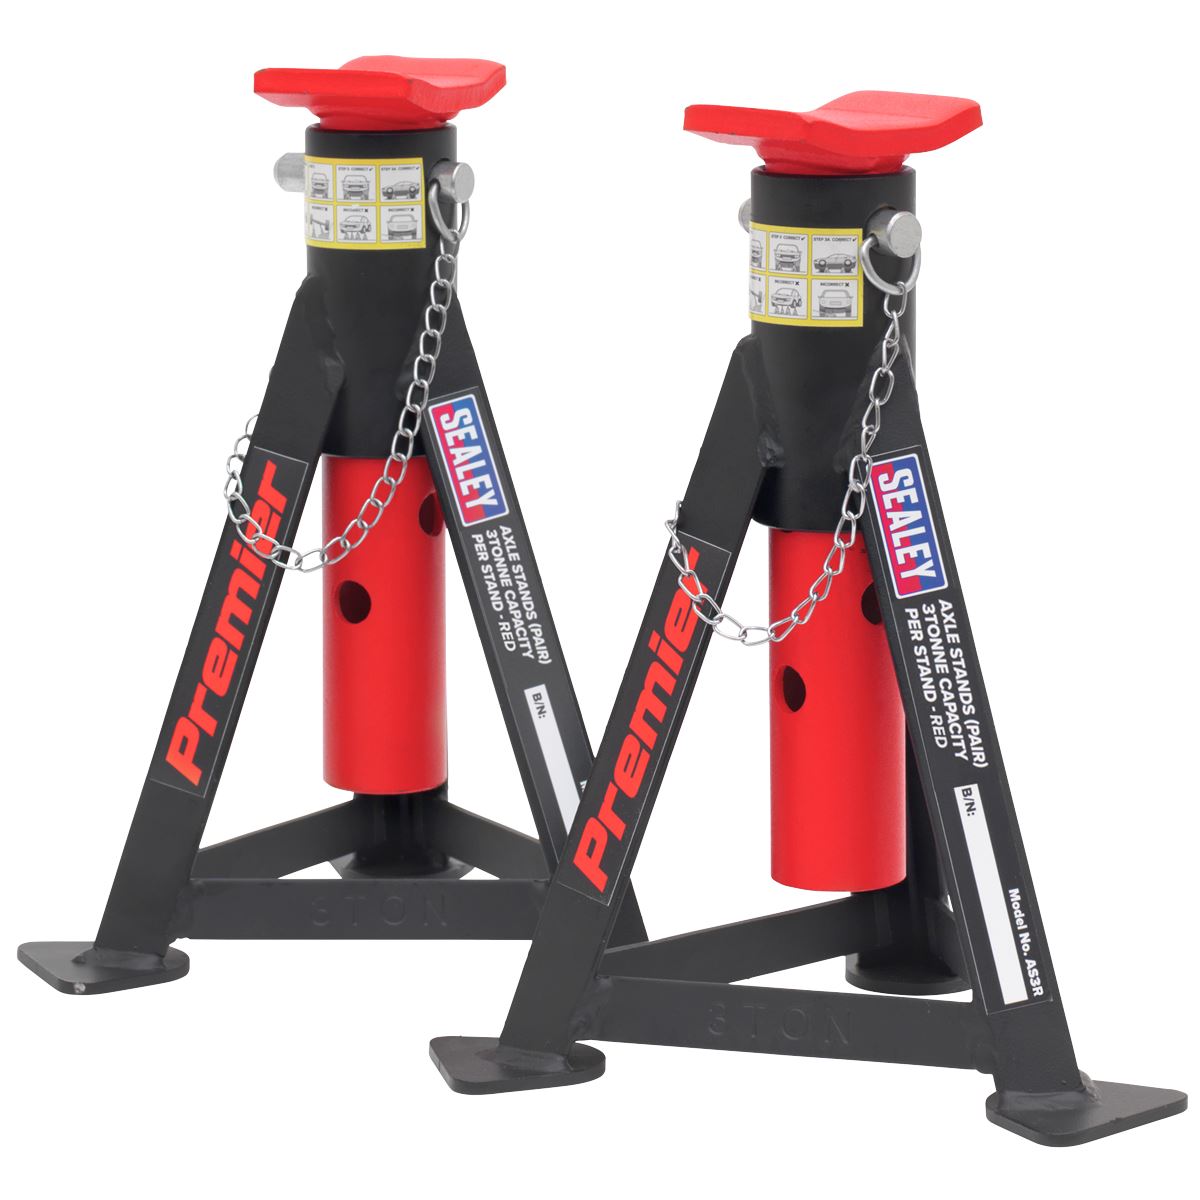 Sealey Premier Premier Axle Stands (Pair) 3 Tonne Capacity per Stand - Red